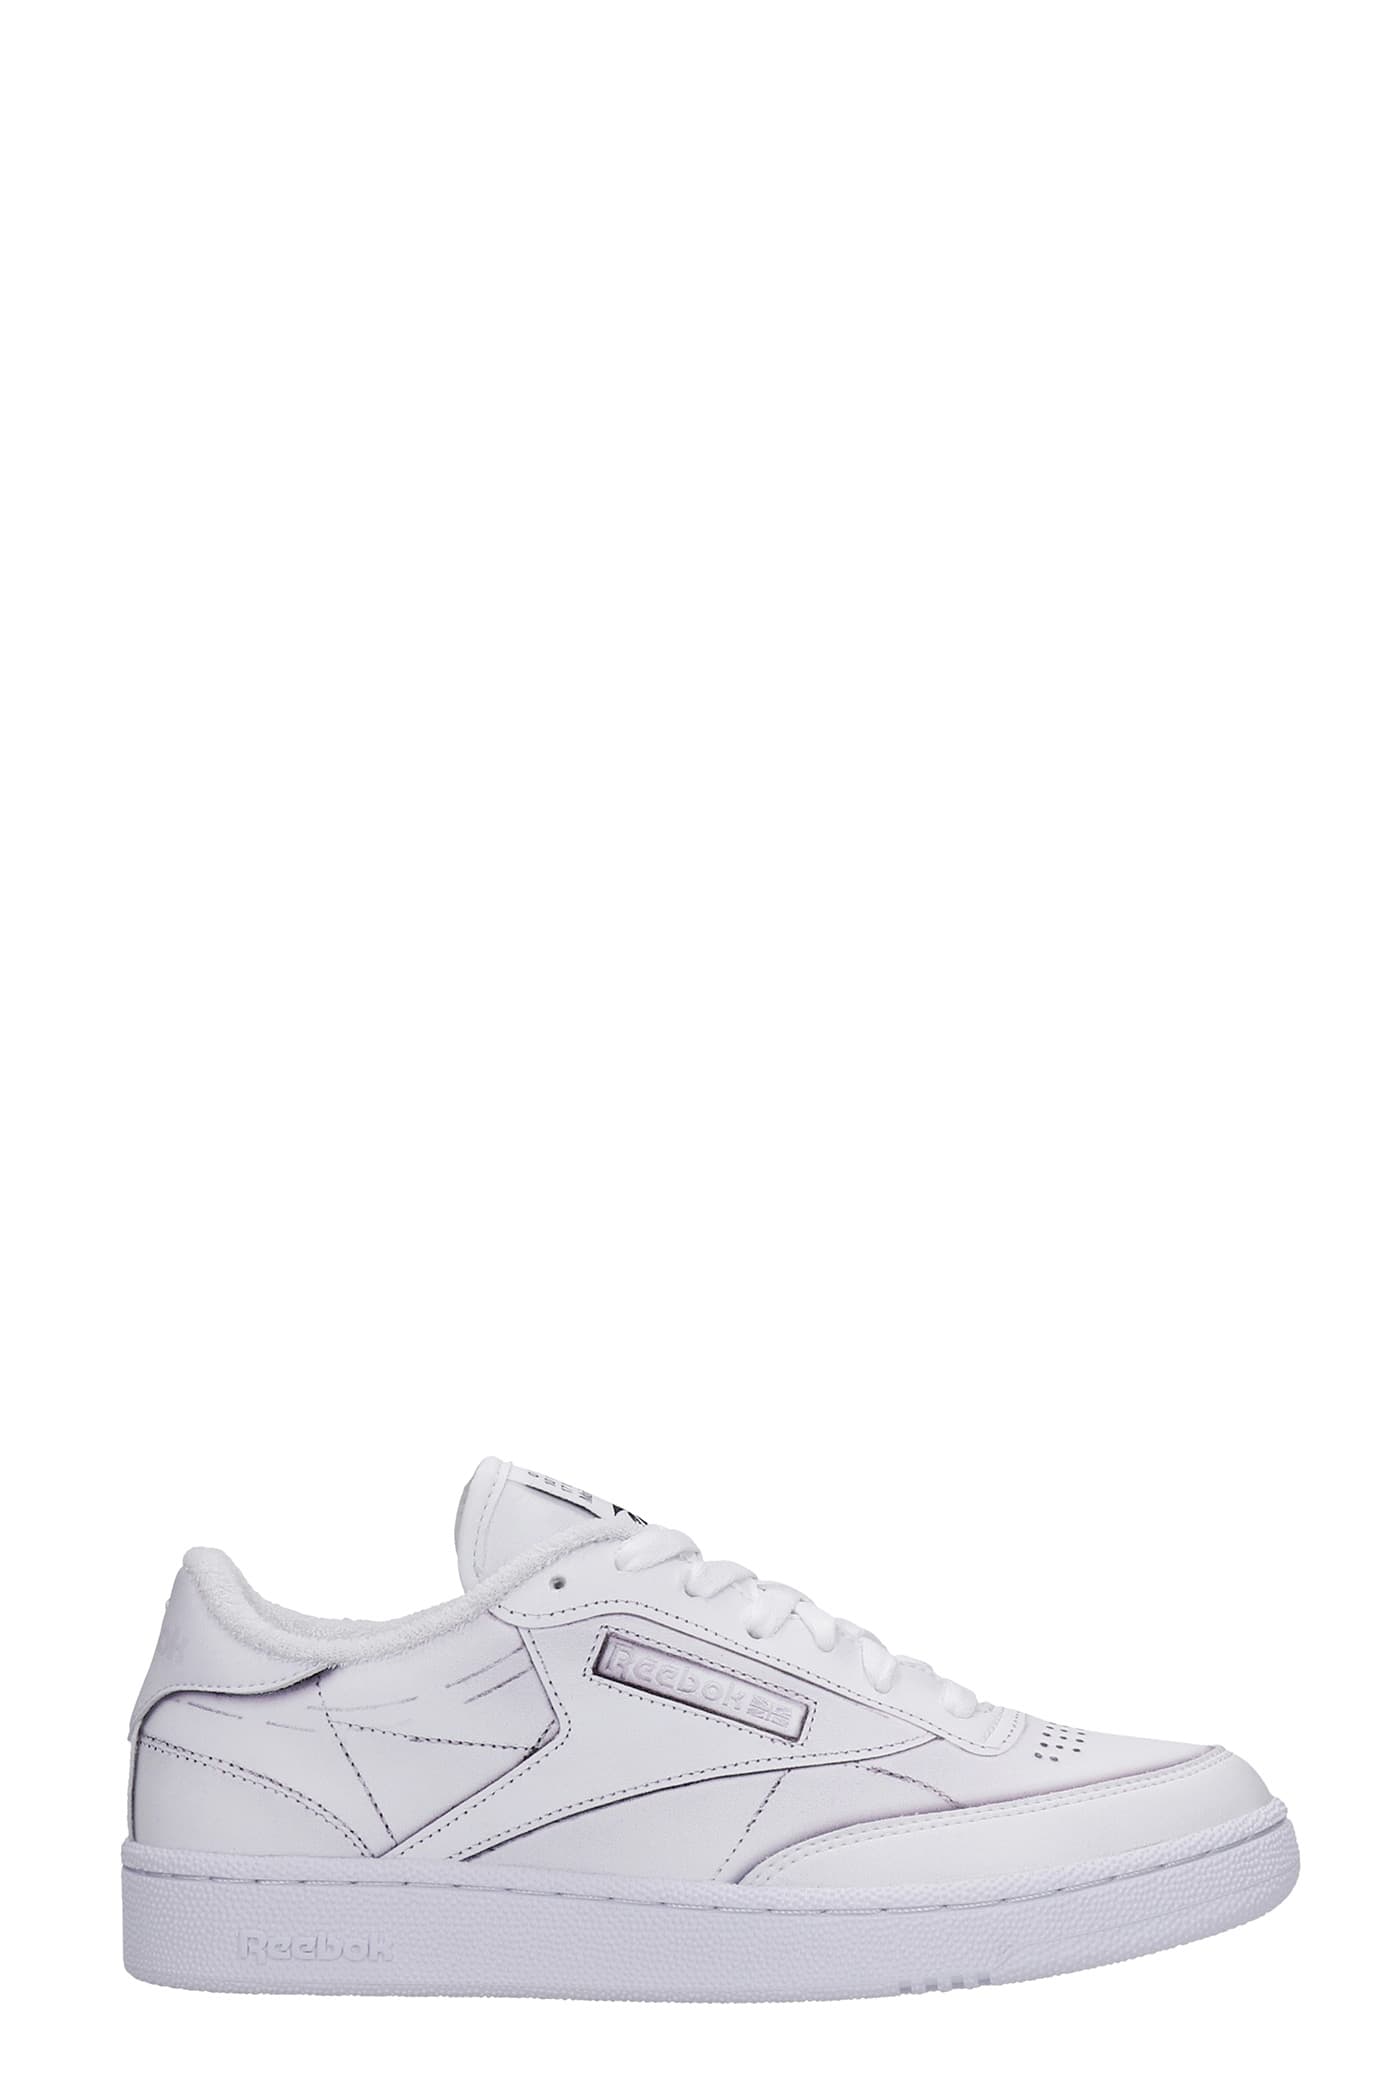 Maison Margiela Project 00 Sneakers In White Leather